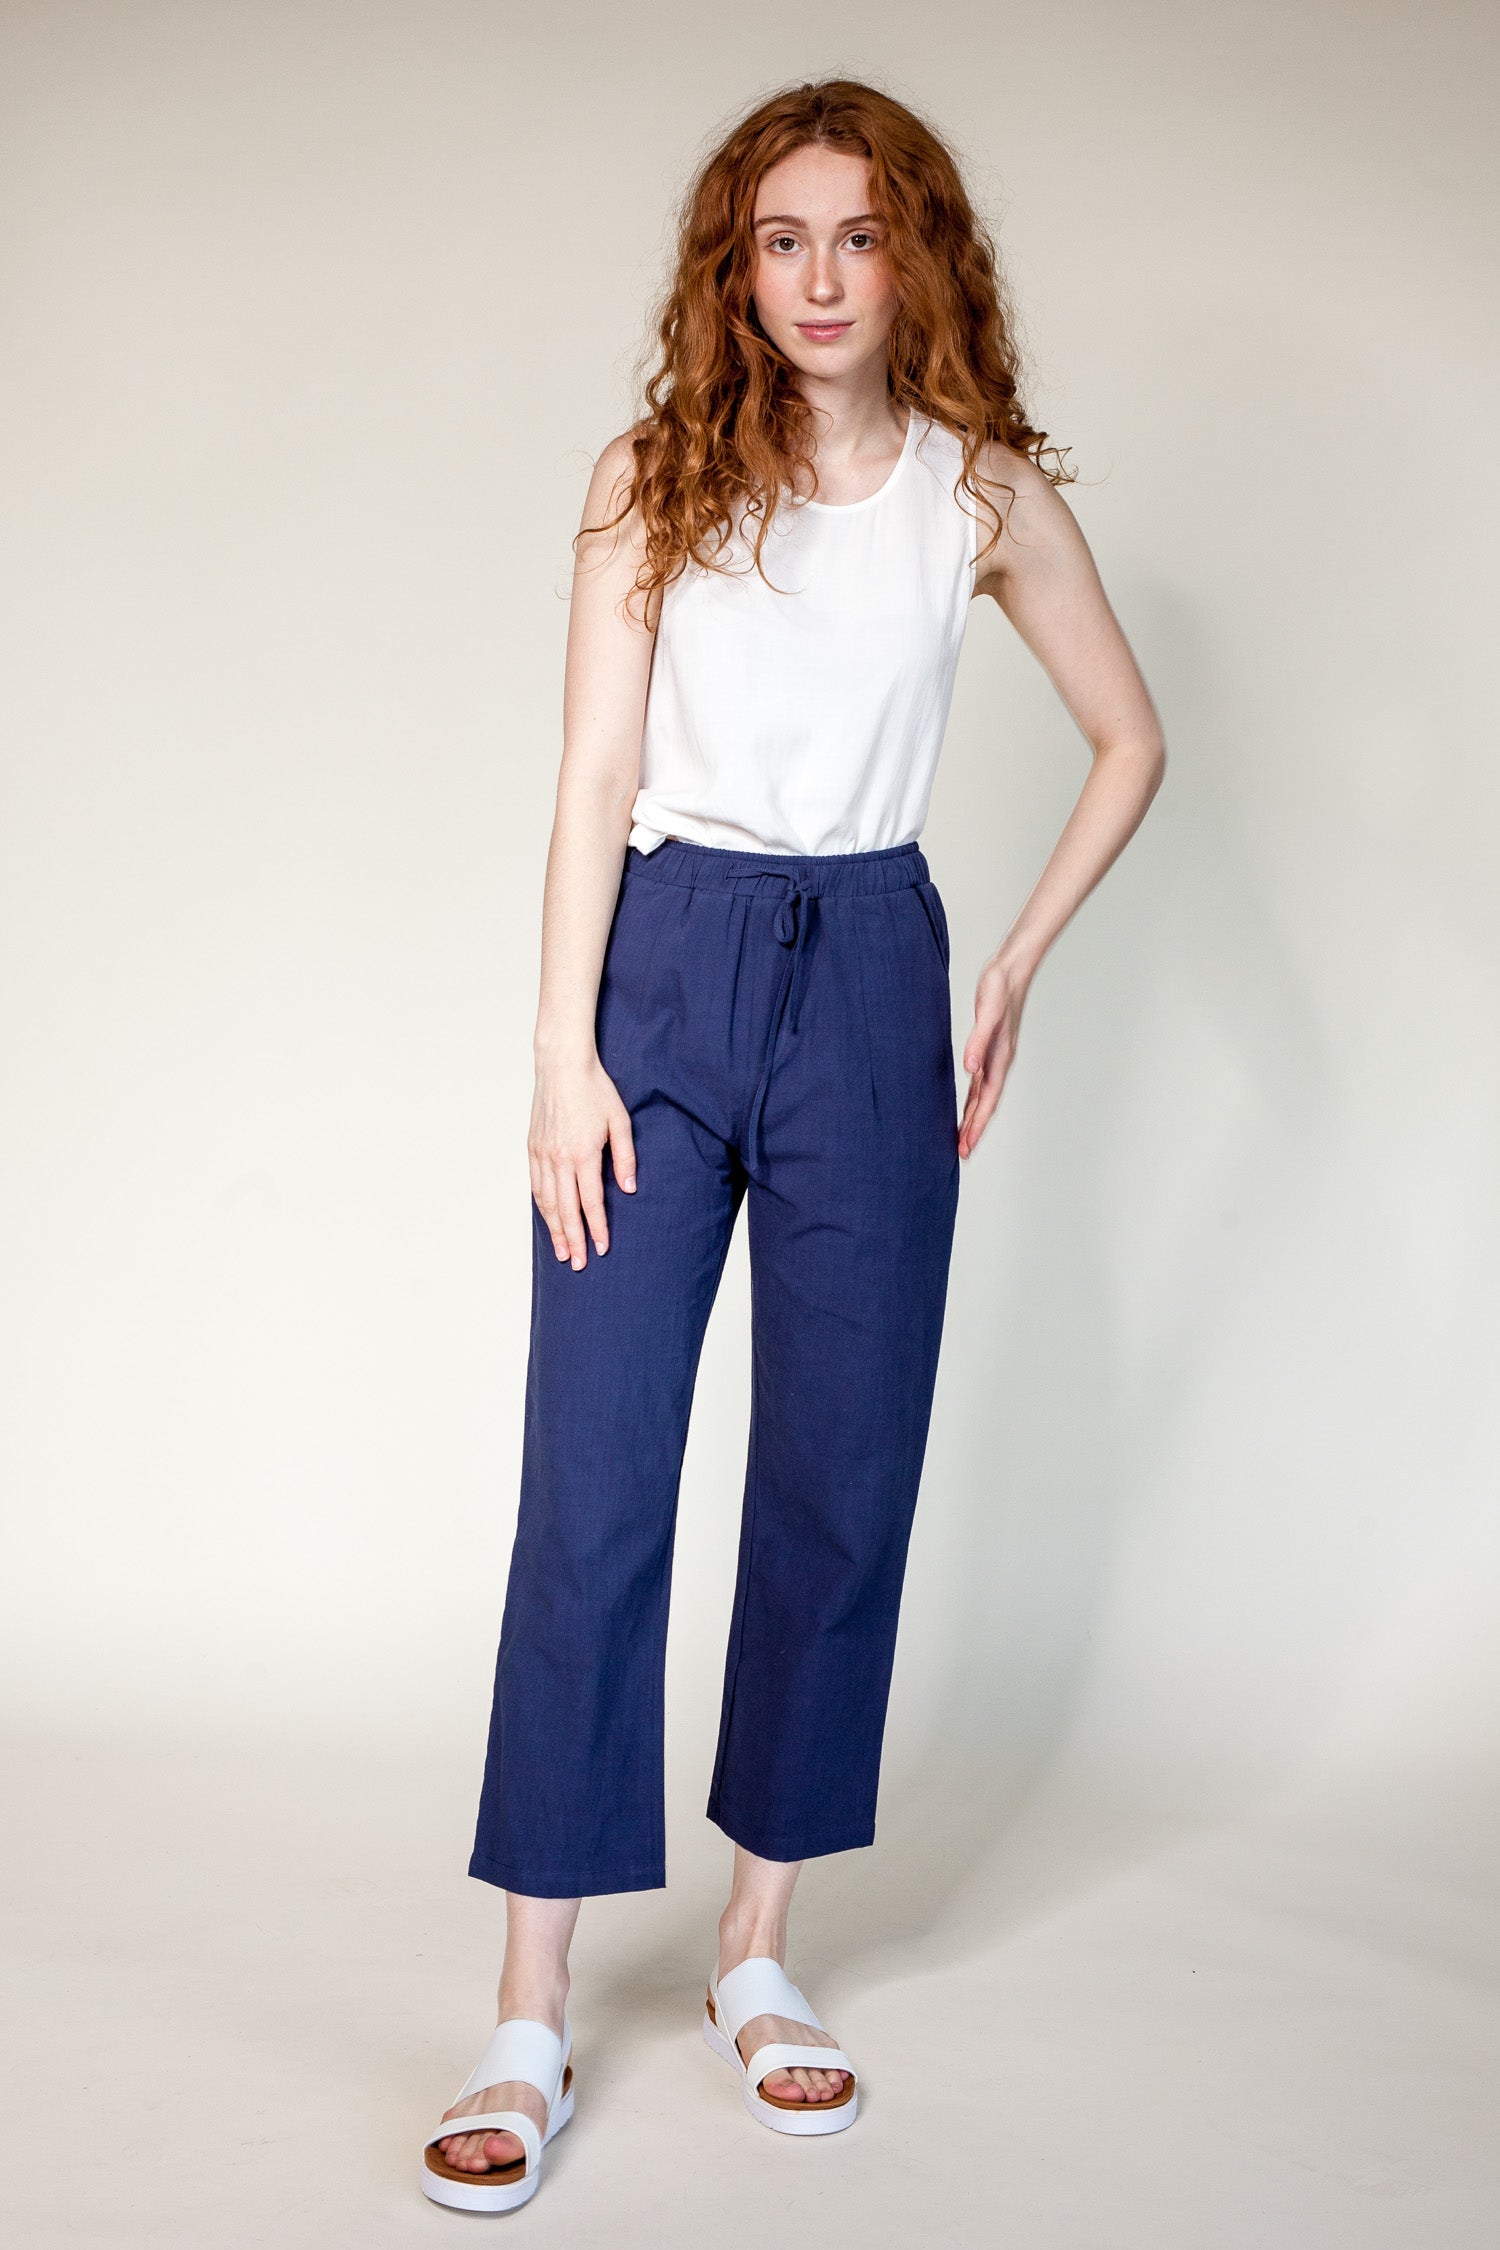 Domingo Pants- Navy - Pink Martini Collection